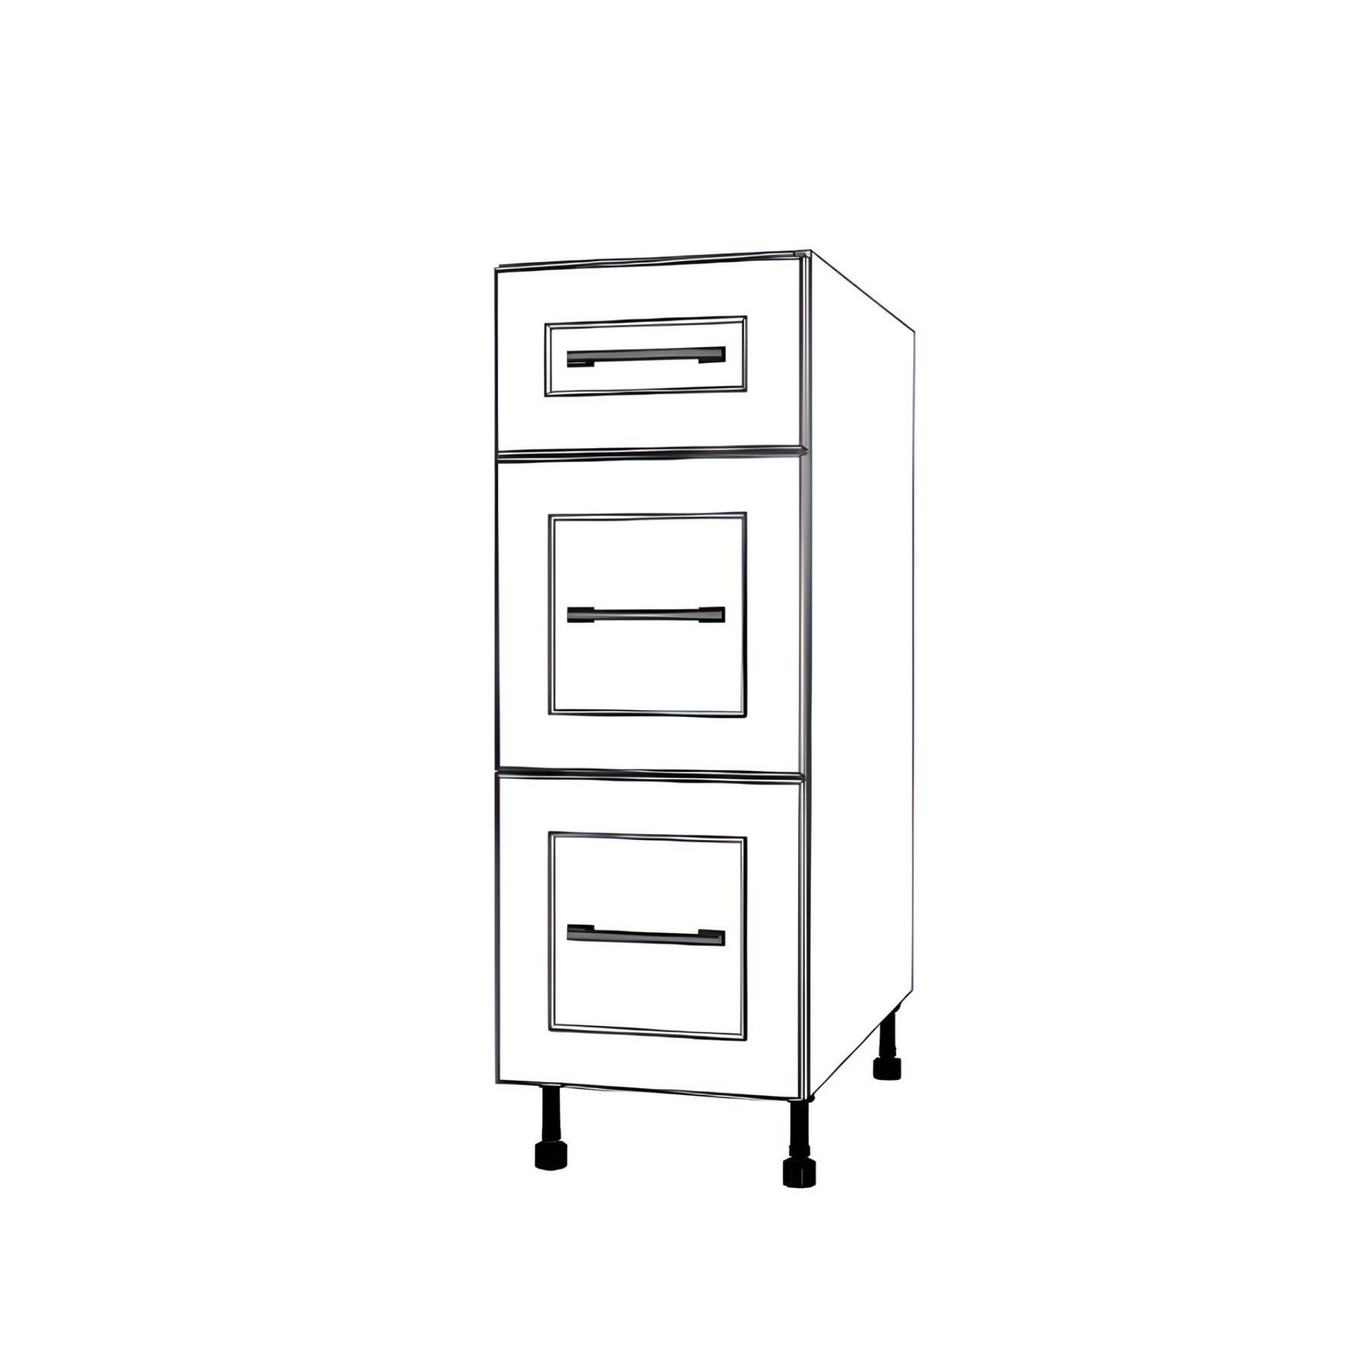 Drawer Cabinets - Painted Doors